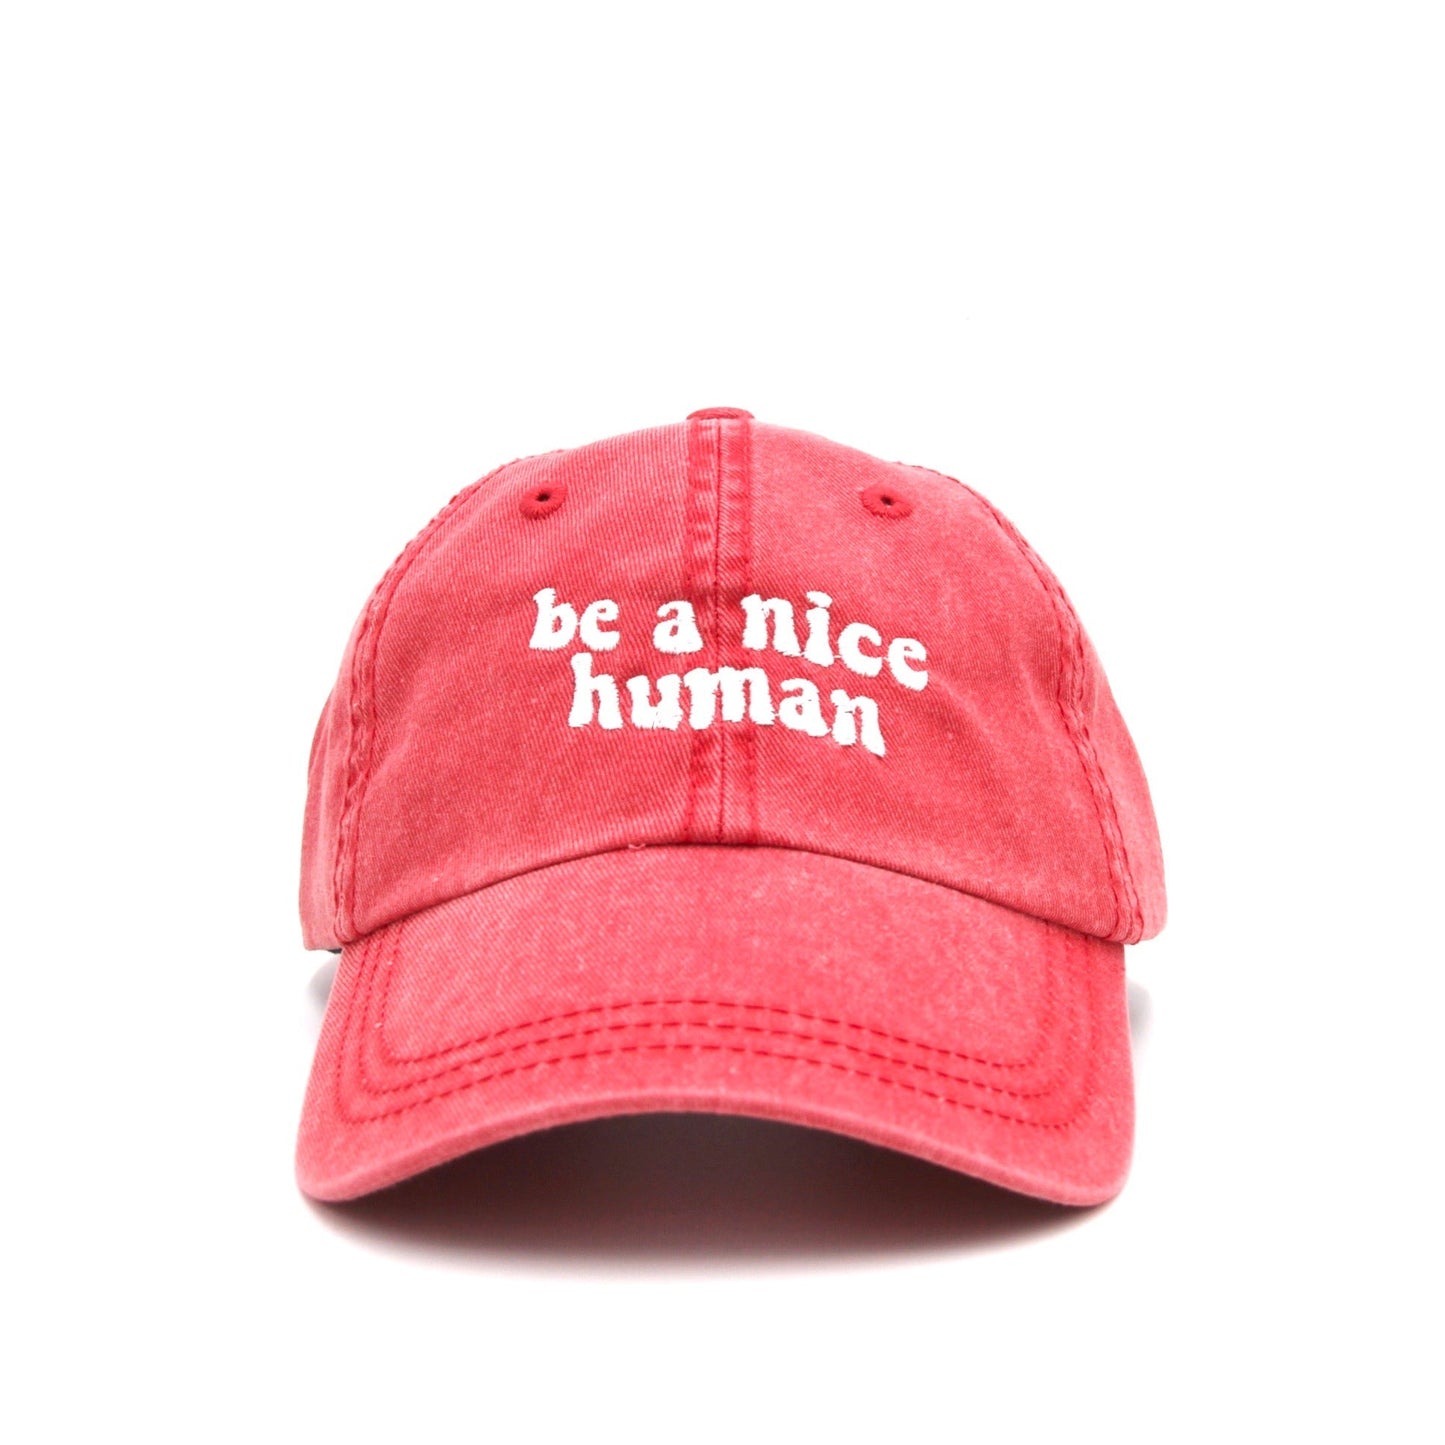 Be A Nice Human Washed Red Cap Wear The Peace Dad Caps Washed Red